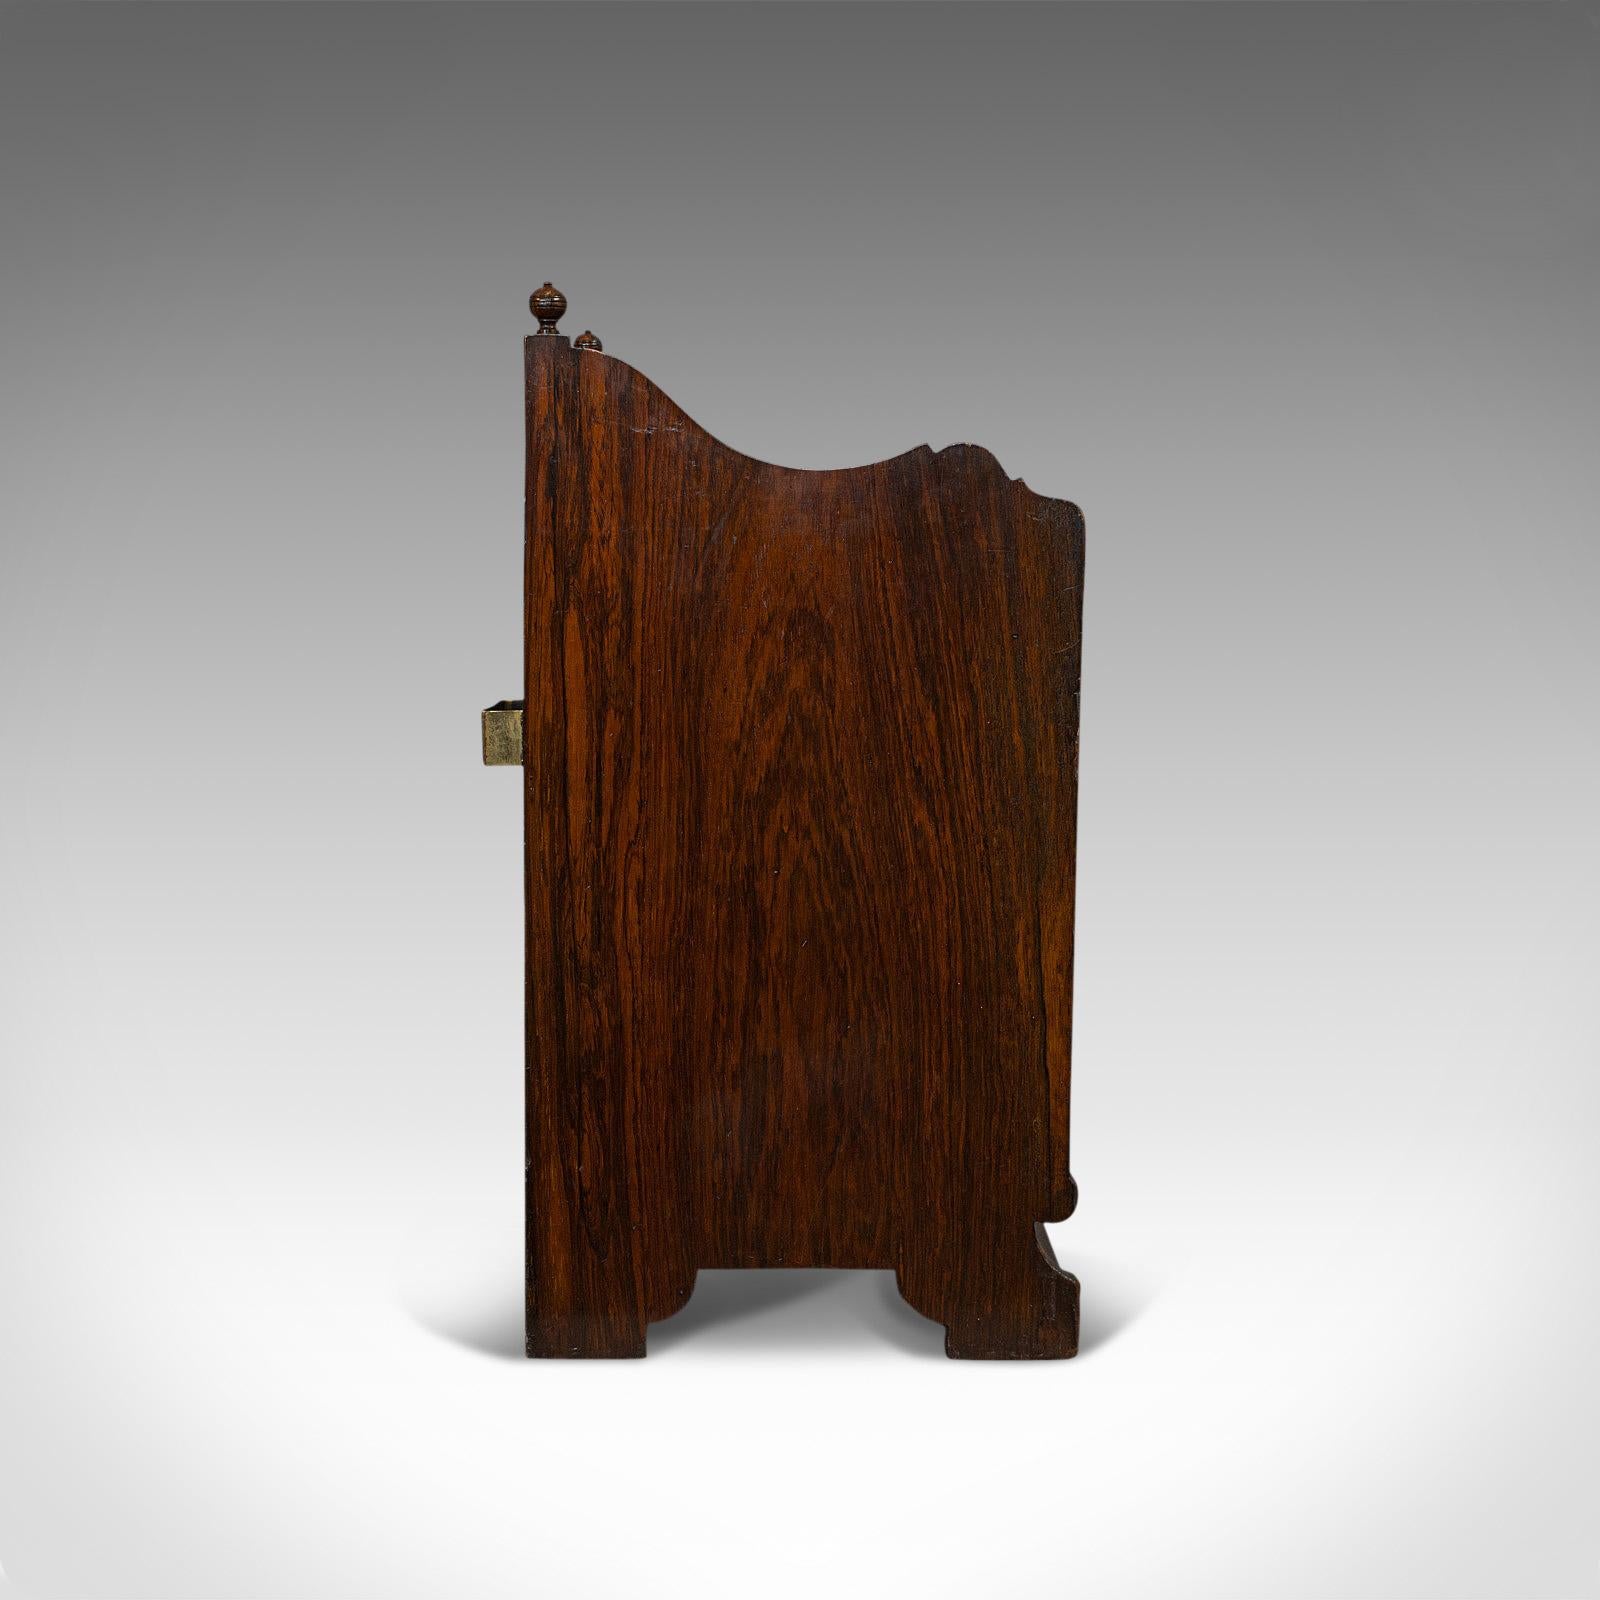 Antique Purdonium, English, Rosewood, Fireside, Cabinet, Edwardian, circa 1910 In Good Condition For Sale In Hele, Devon, GB